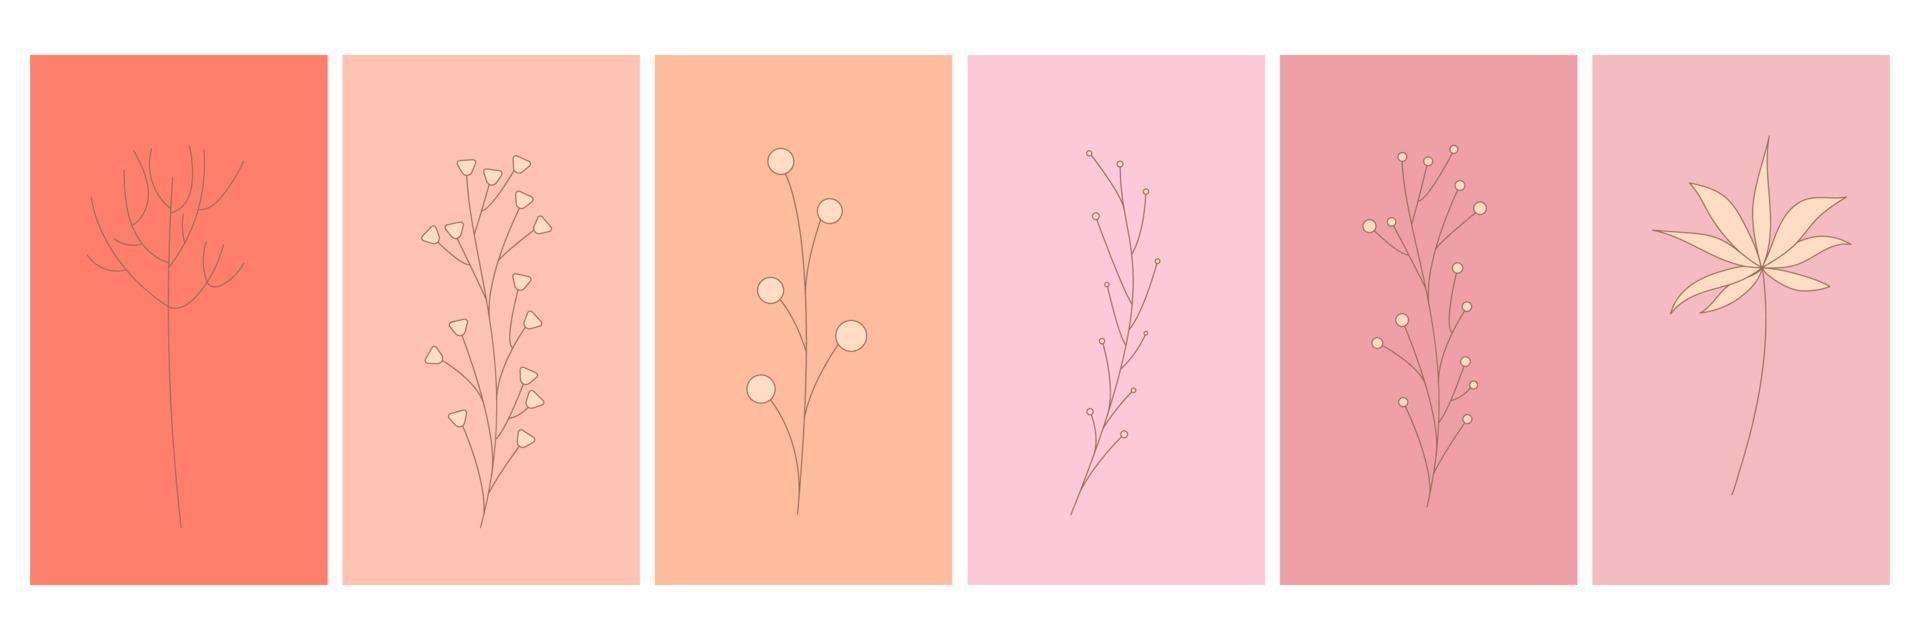 Abstract elements, minimalistic simple floral elements. leaves and flowers. Collection of art posters in pastel colors. design for social networks, postcards, prints. Outline, line, doodle style. vector